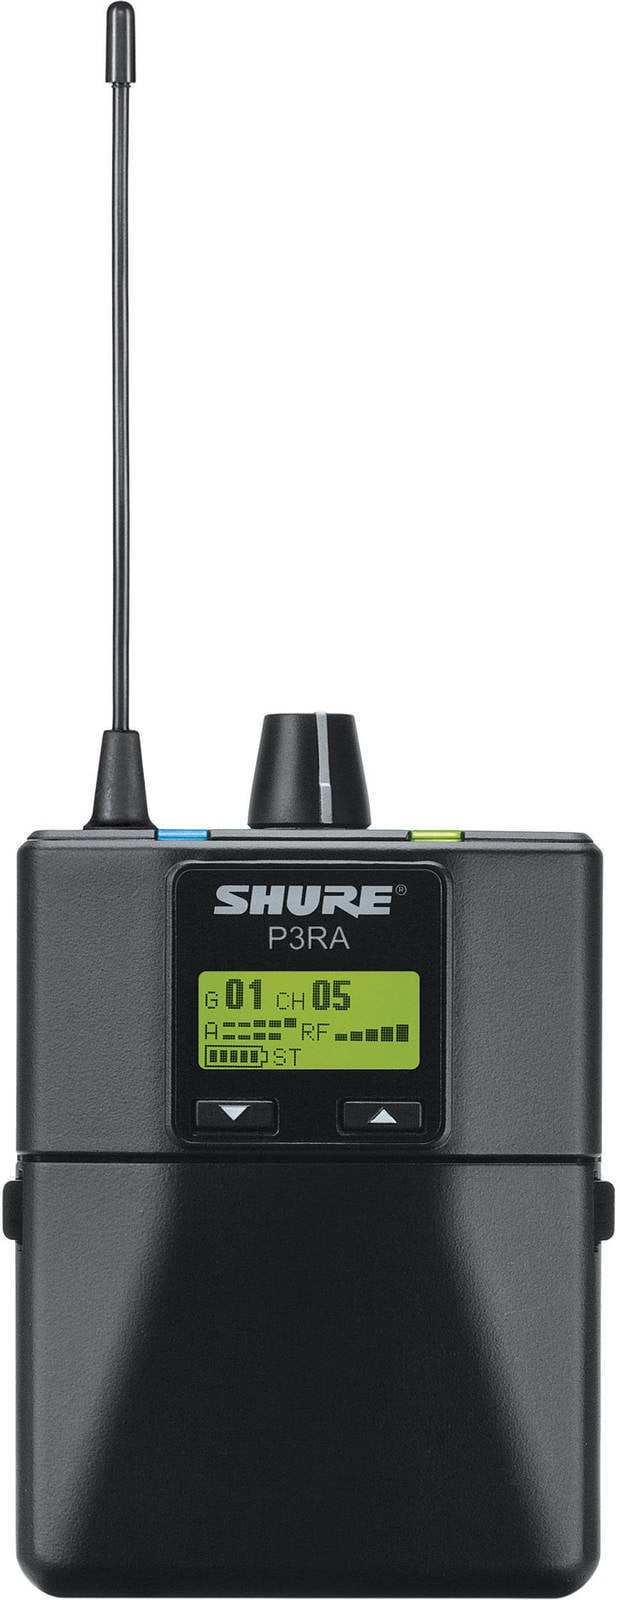 Componente In-Ear Shure P3RA-H20 - PSM 300 Bodypack Receiver H20: 518–542 MHz